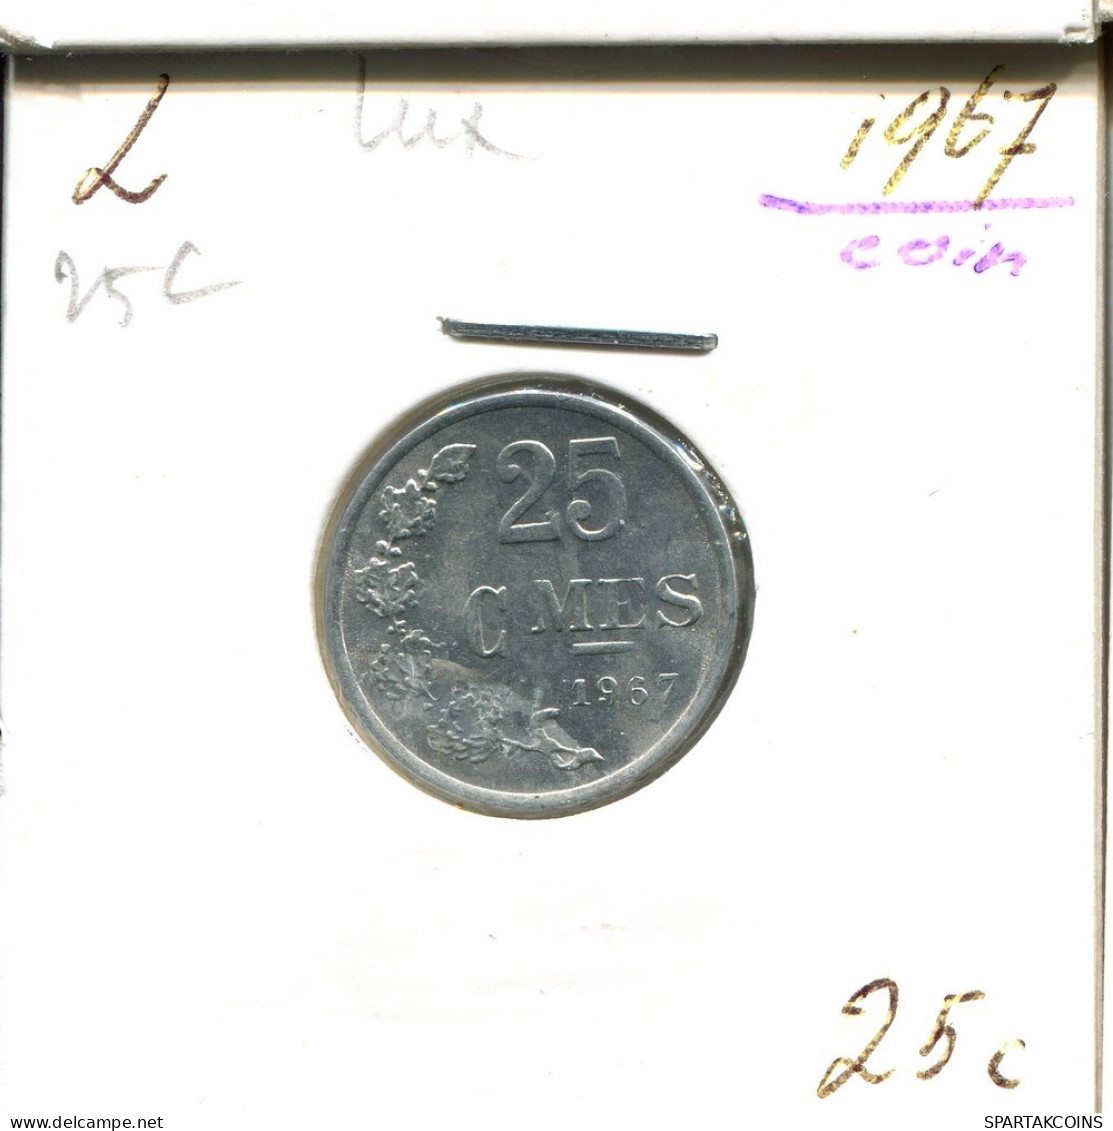 25 CENTIMES 1967 LUXEMBURGO LUXEMBOURG Moneda #AT195.E.A - Luxembourg